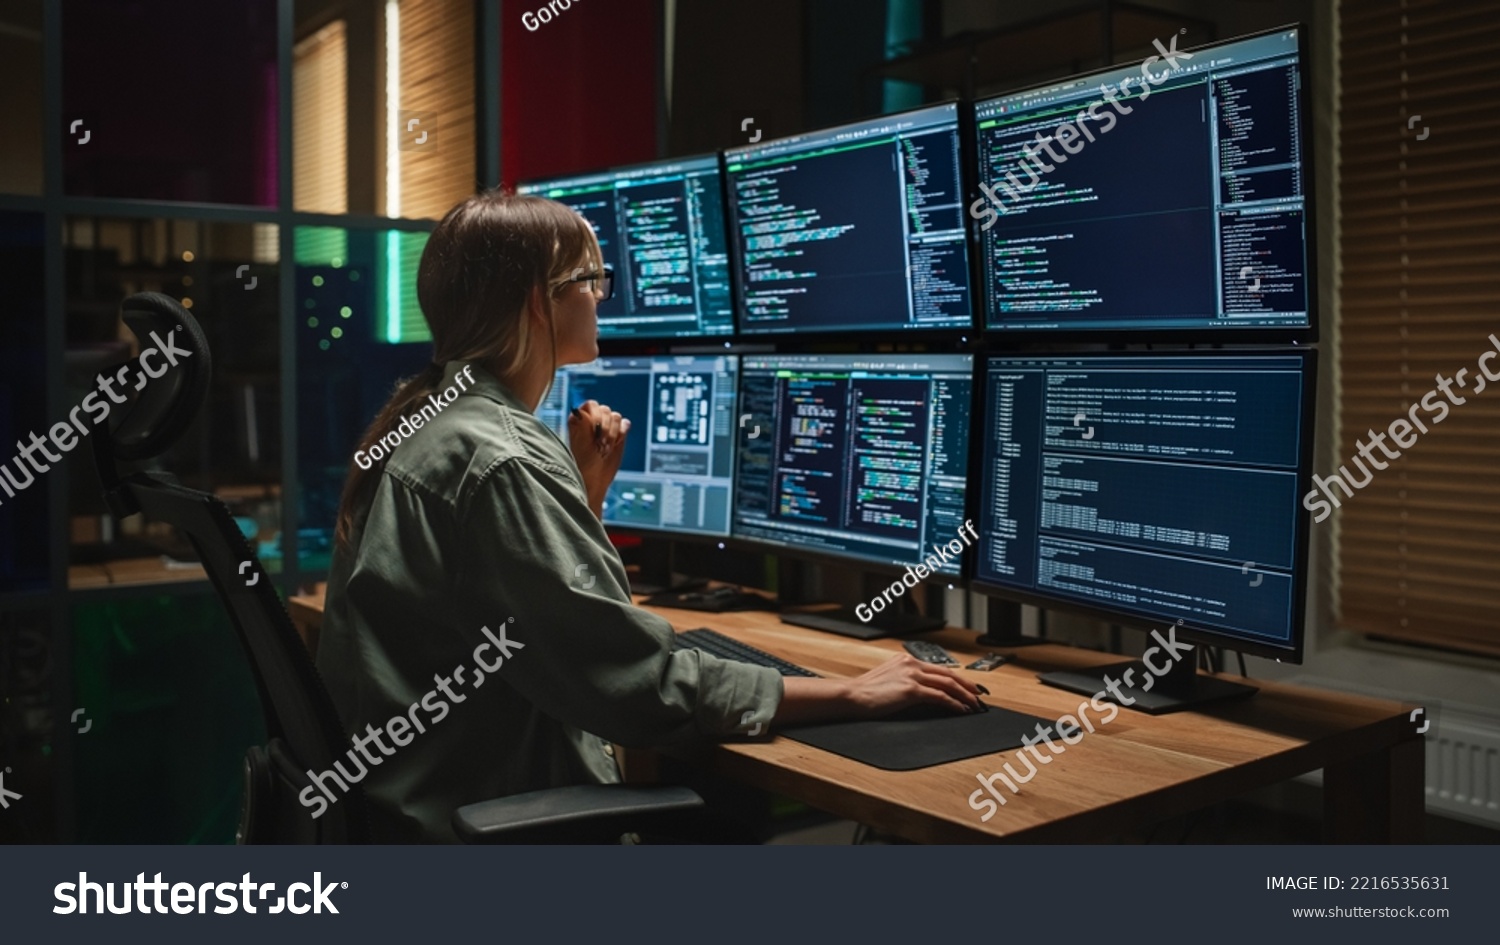 Cyber Security Agency: Female Programmer Coding on Desktop Computer With Six Displays in Dark Office. Caucasian Woman Monitors Data Protection System, Monitoring Information on SAAS Servers. #2216535631